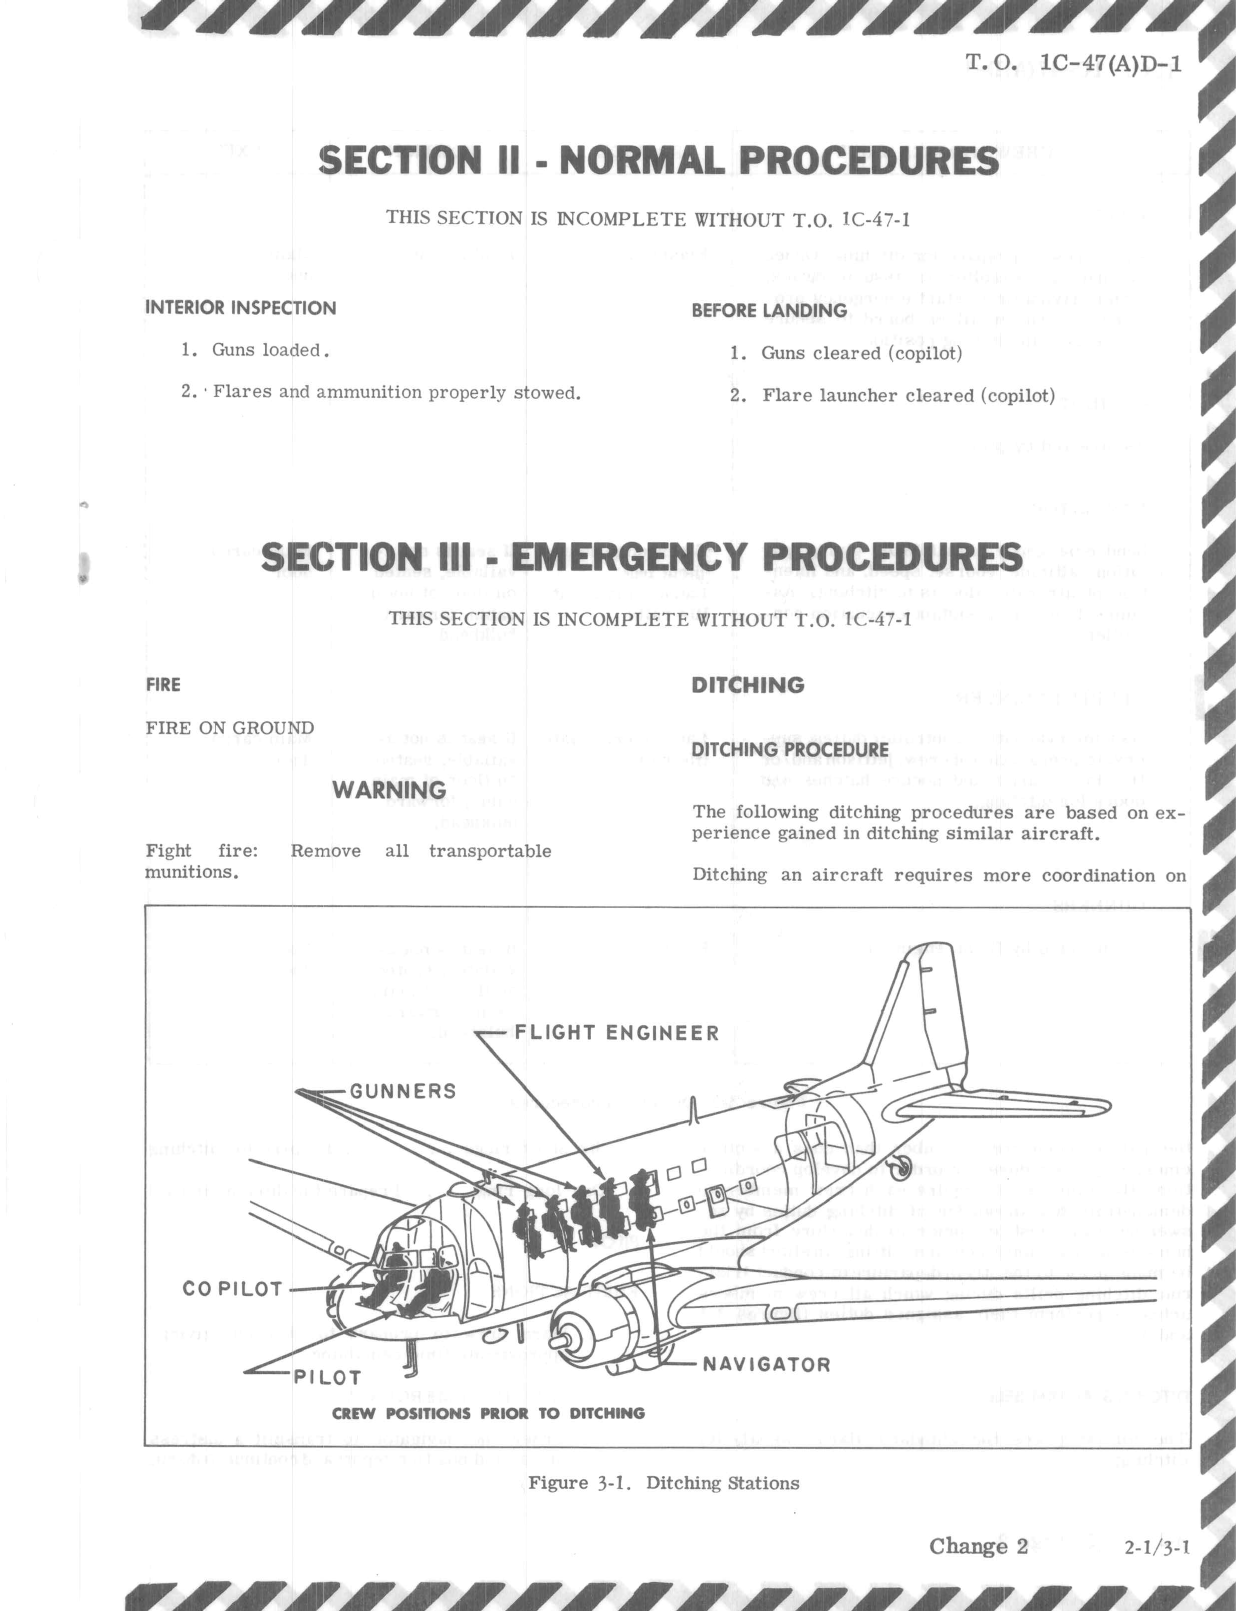 Sample page 9 from AirCorps Library document: Partial Flight Manual for AC-47D Aircraft